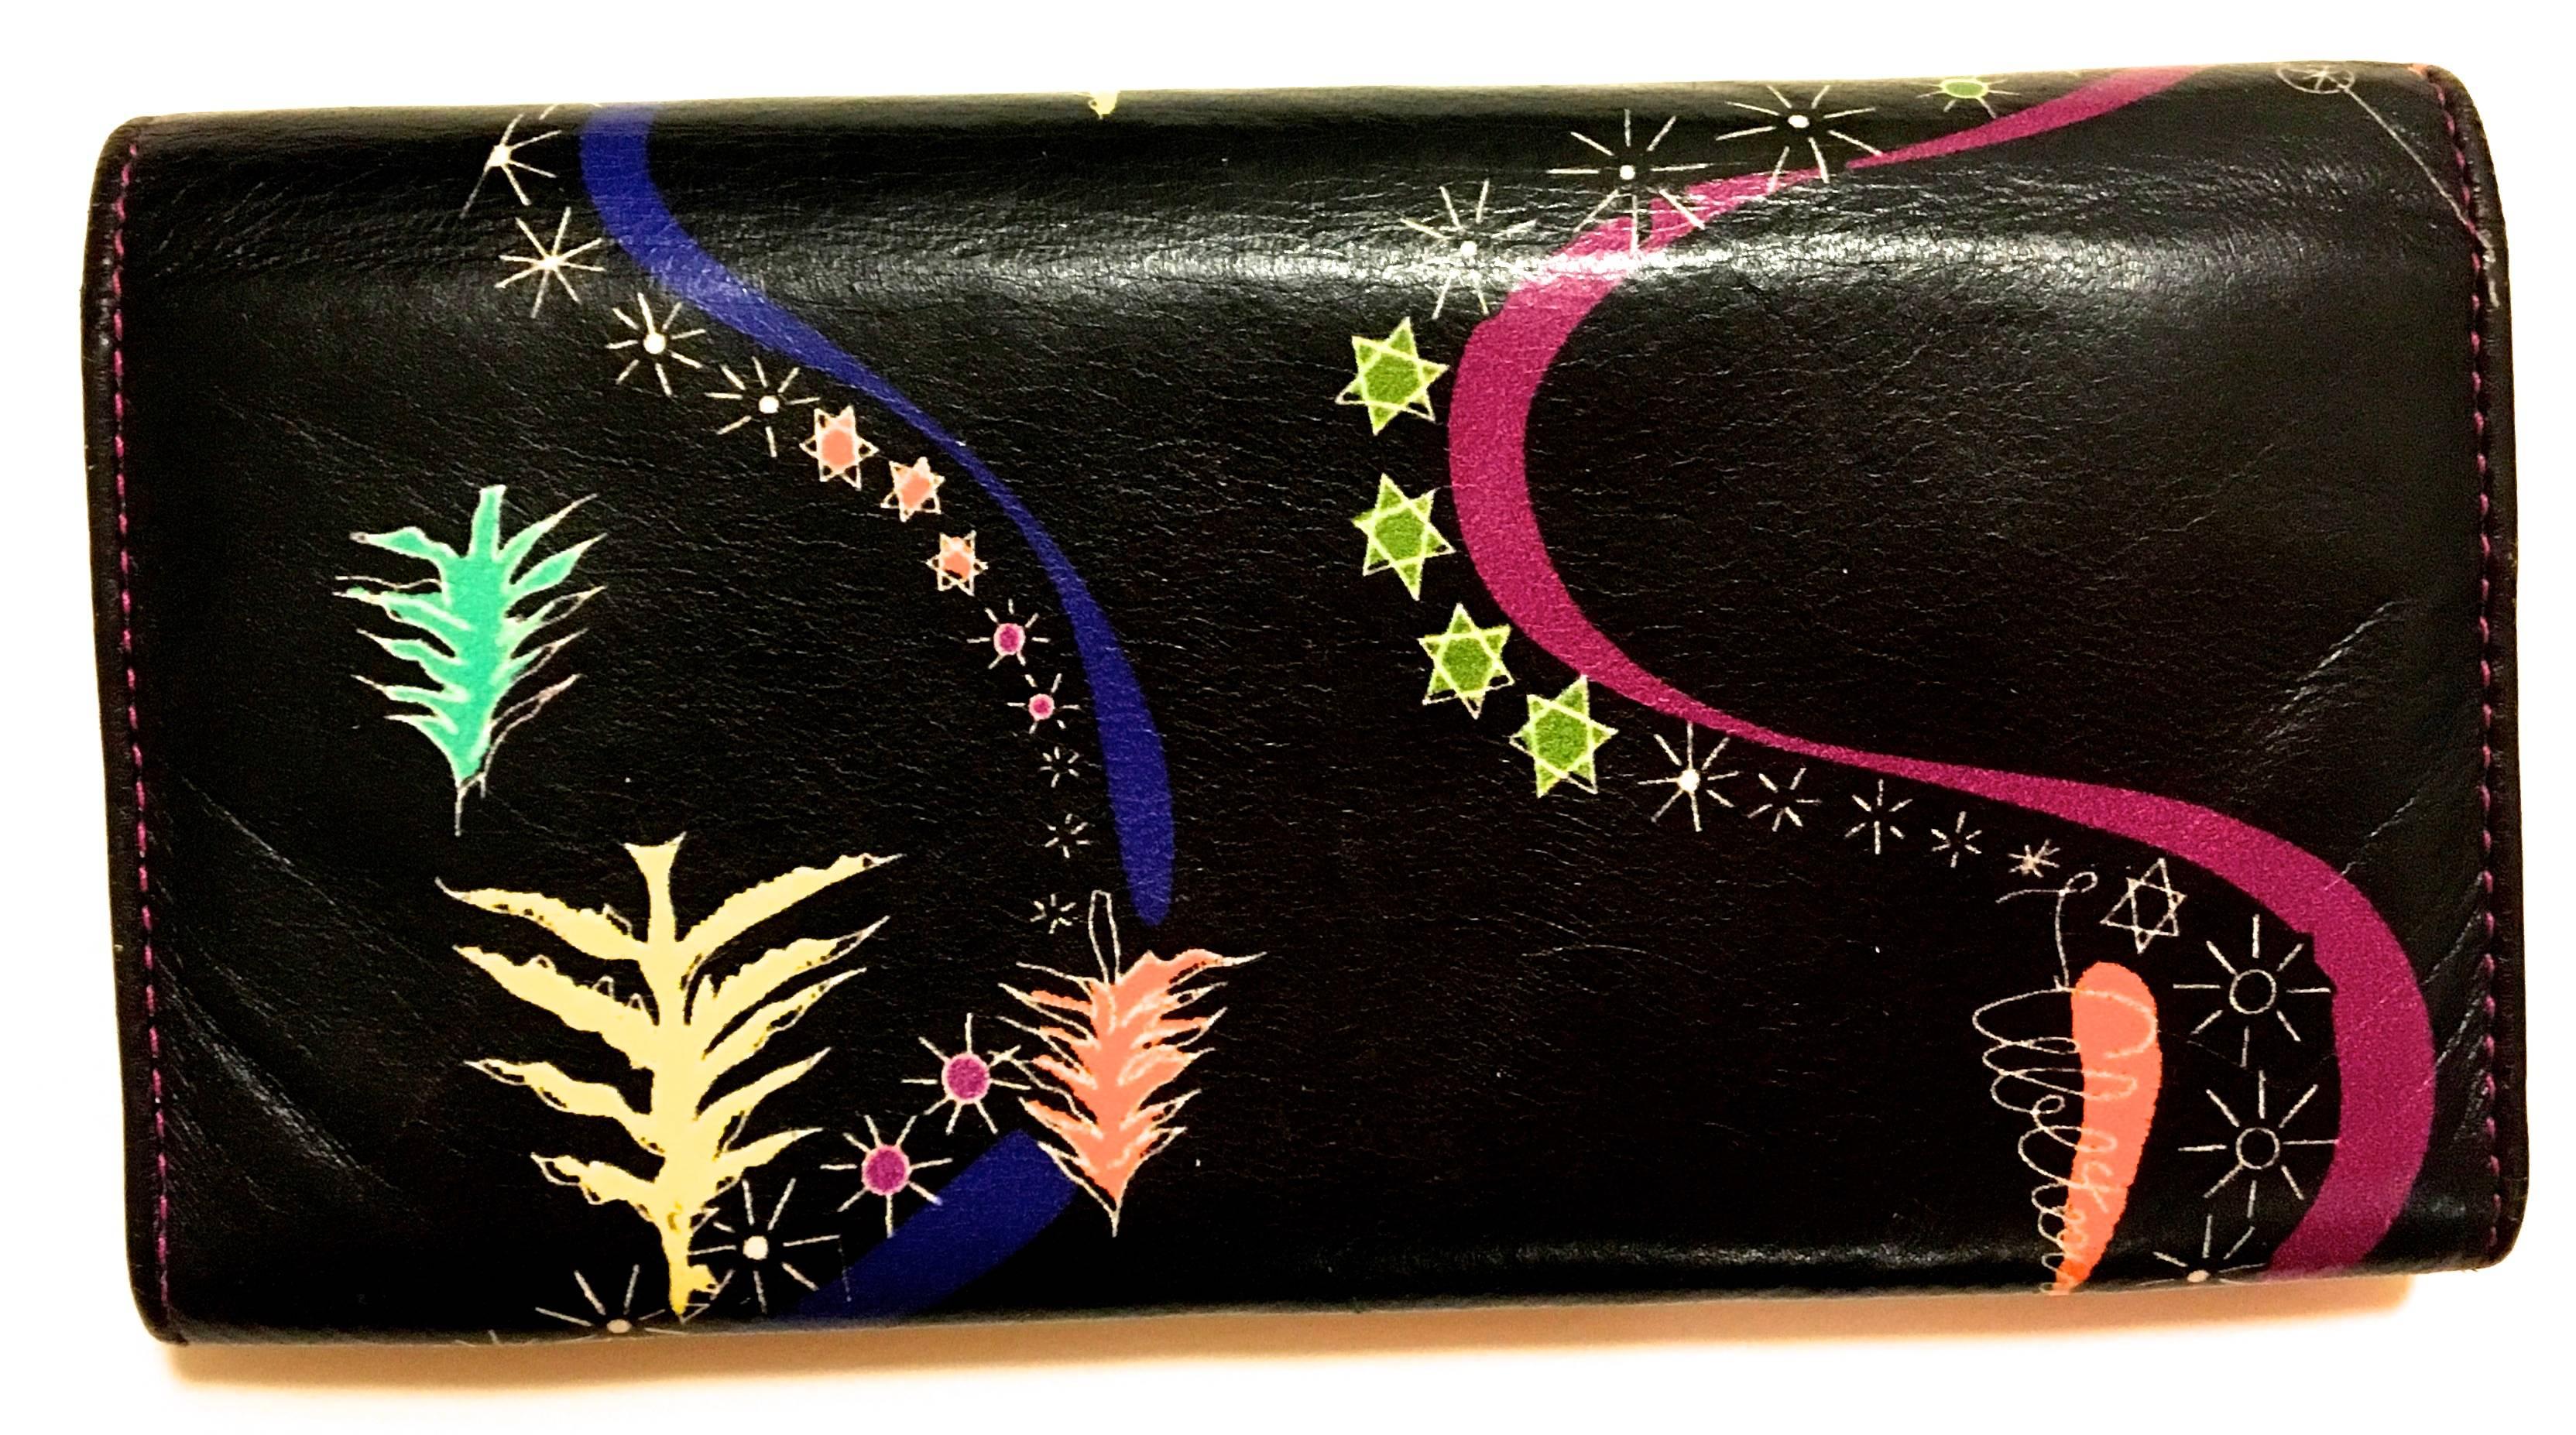 Presented here is a beautiful leather wallet from Emilio Pucci. This extremely rare piece is from the 1990's and beautiful leather is soft to the touch. The design is comprised of a solid black background on the exterior with stars, swirls and